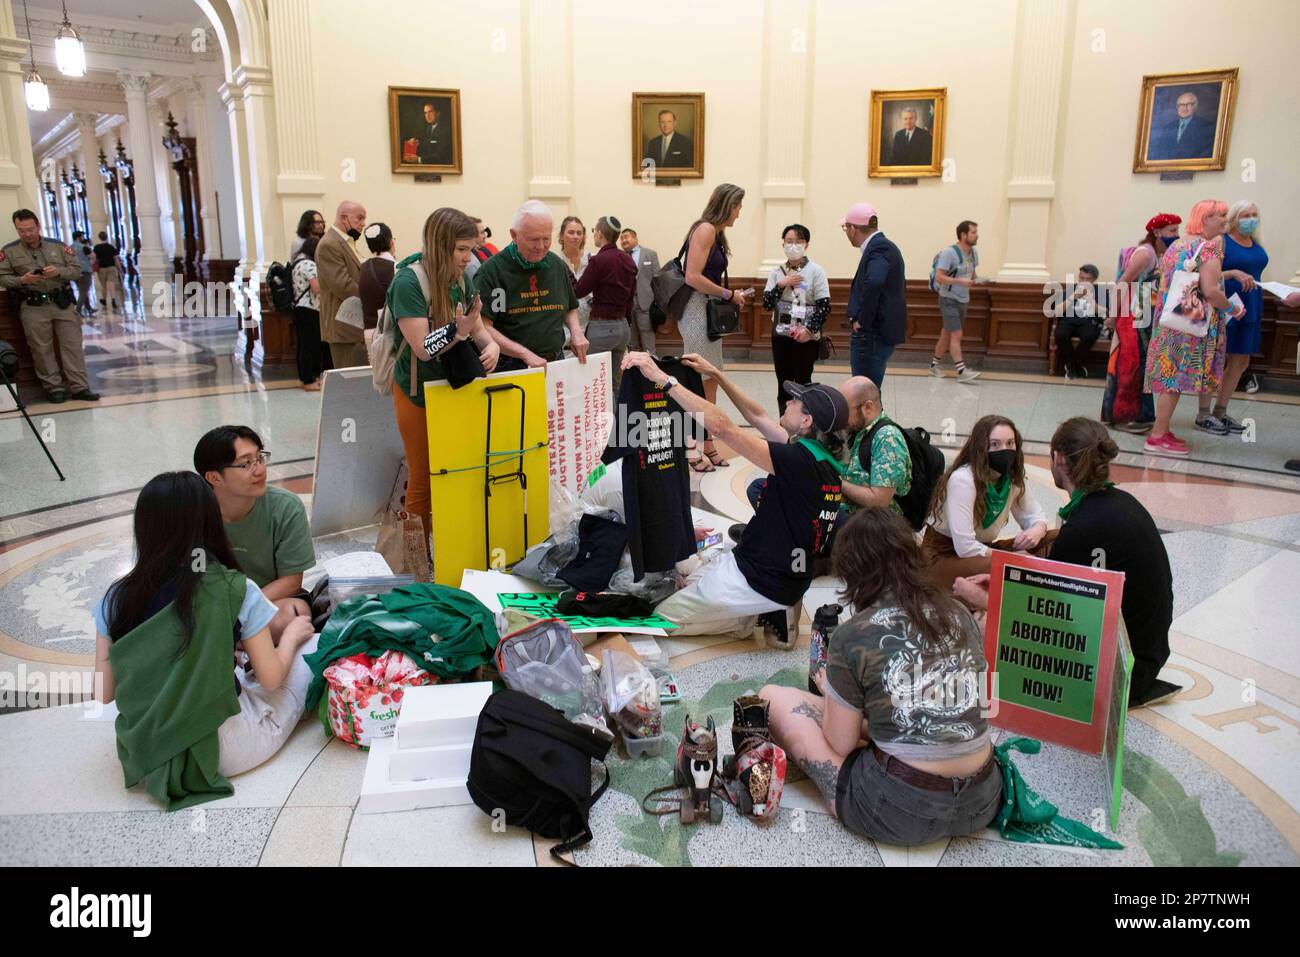 A group of men and women advocating for abortion rights participate in a sit-in in the Texas Capitol rotunda as part of an International Women's Day activity. Credit: Bob Daemmrich/Alamy Live News Stock Photo